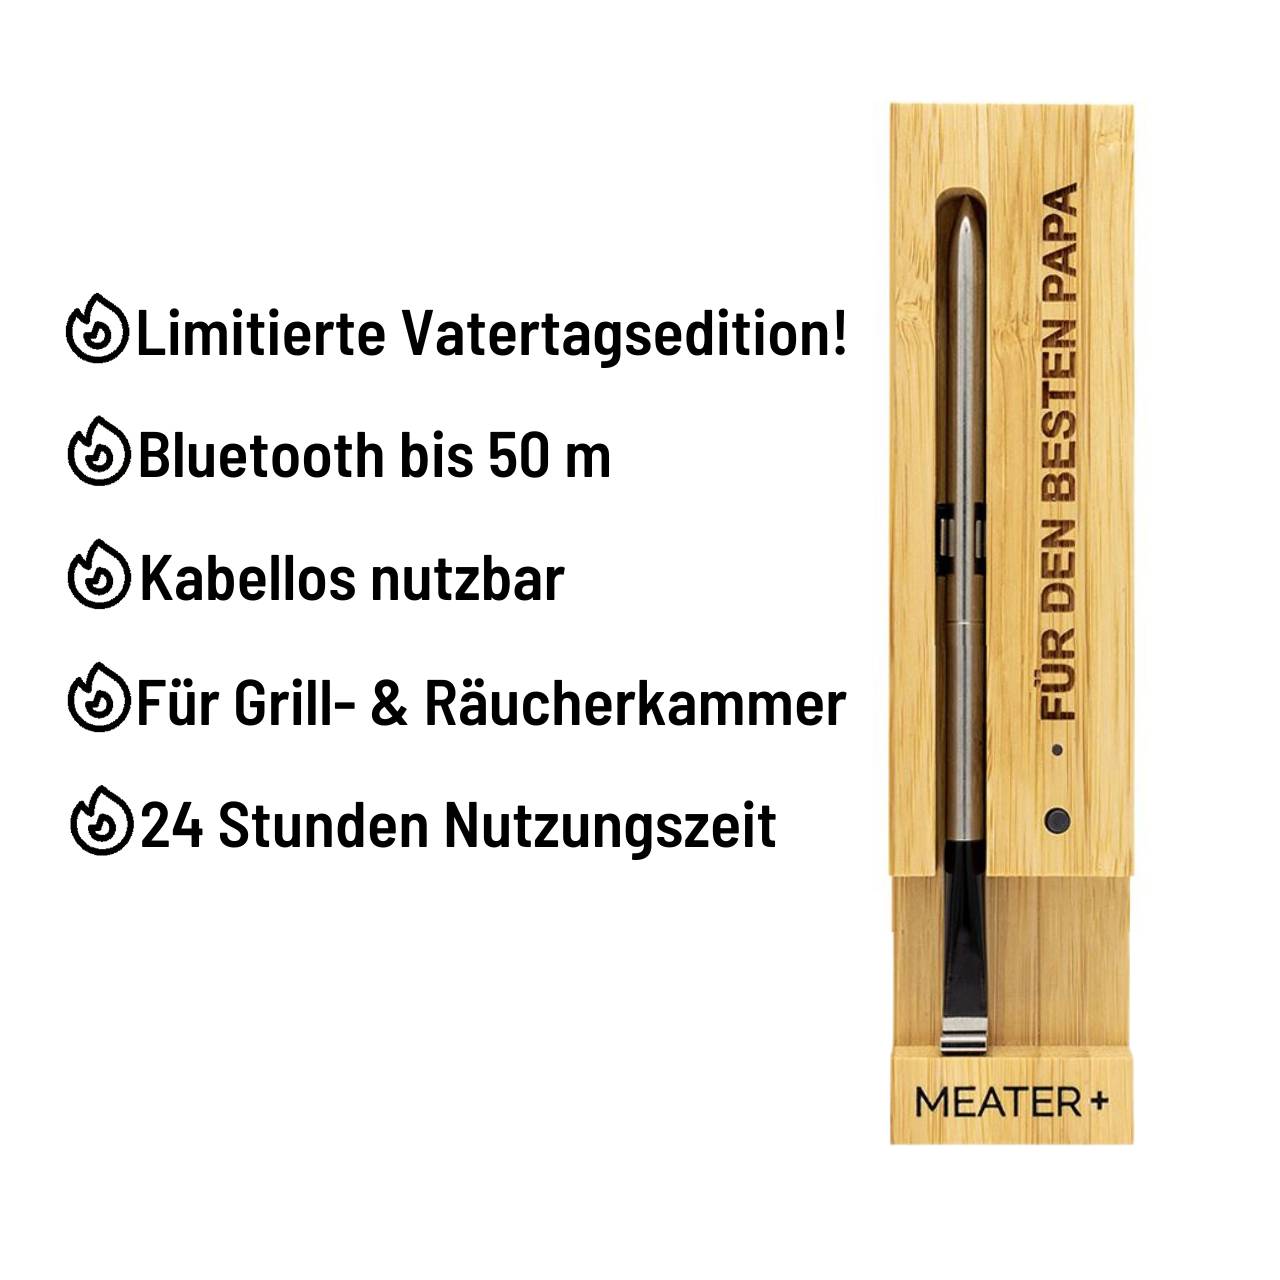 MEATER Plus - Vatertagsedition! - Bluetooth Thermometer